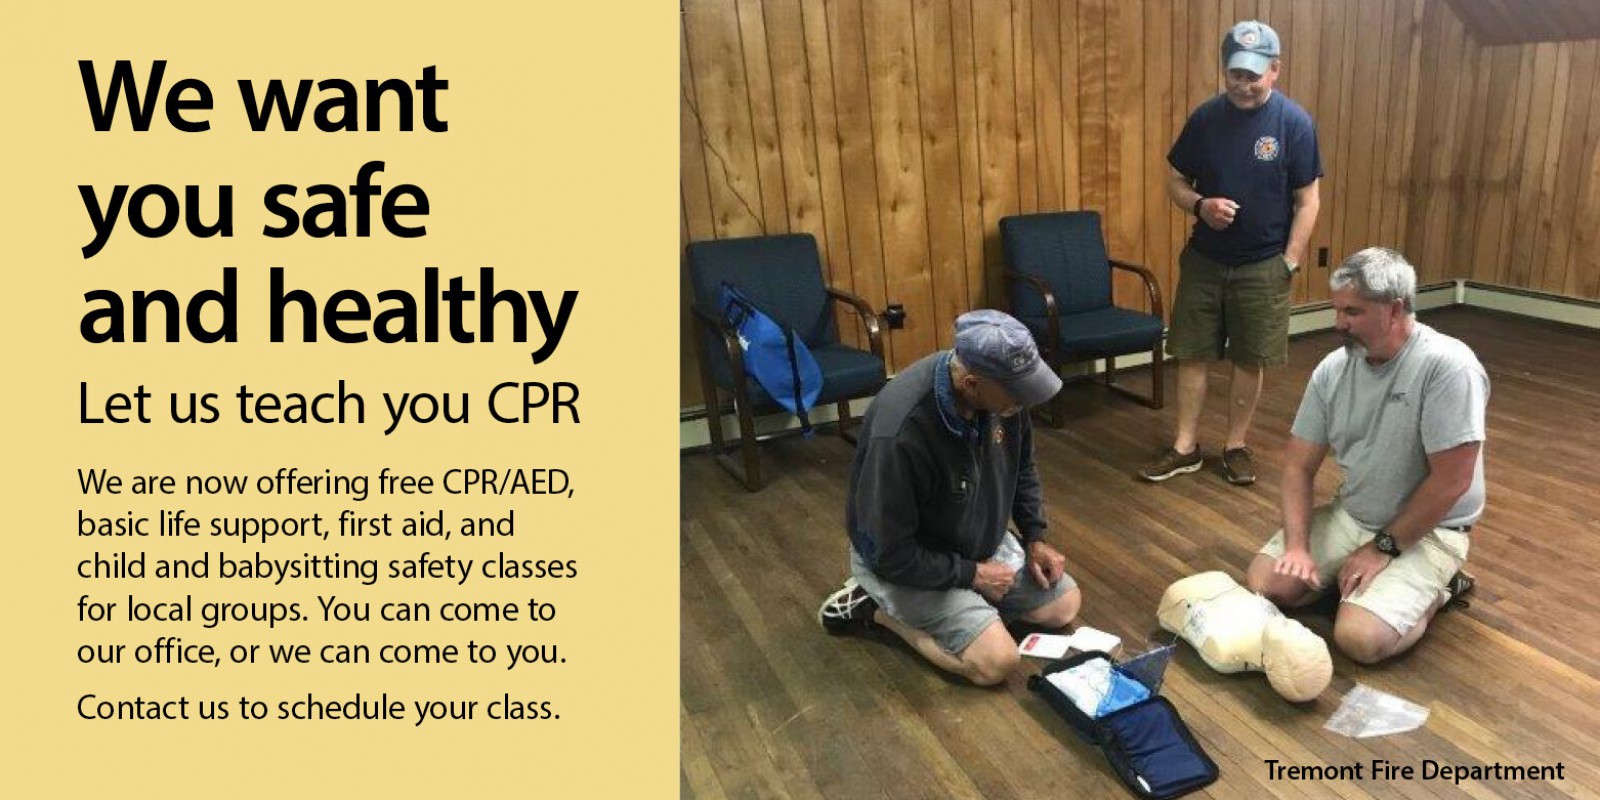 let us teach you cpr